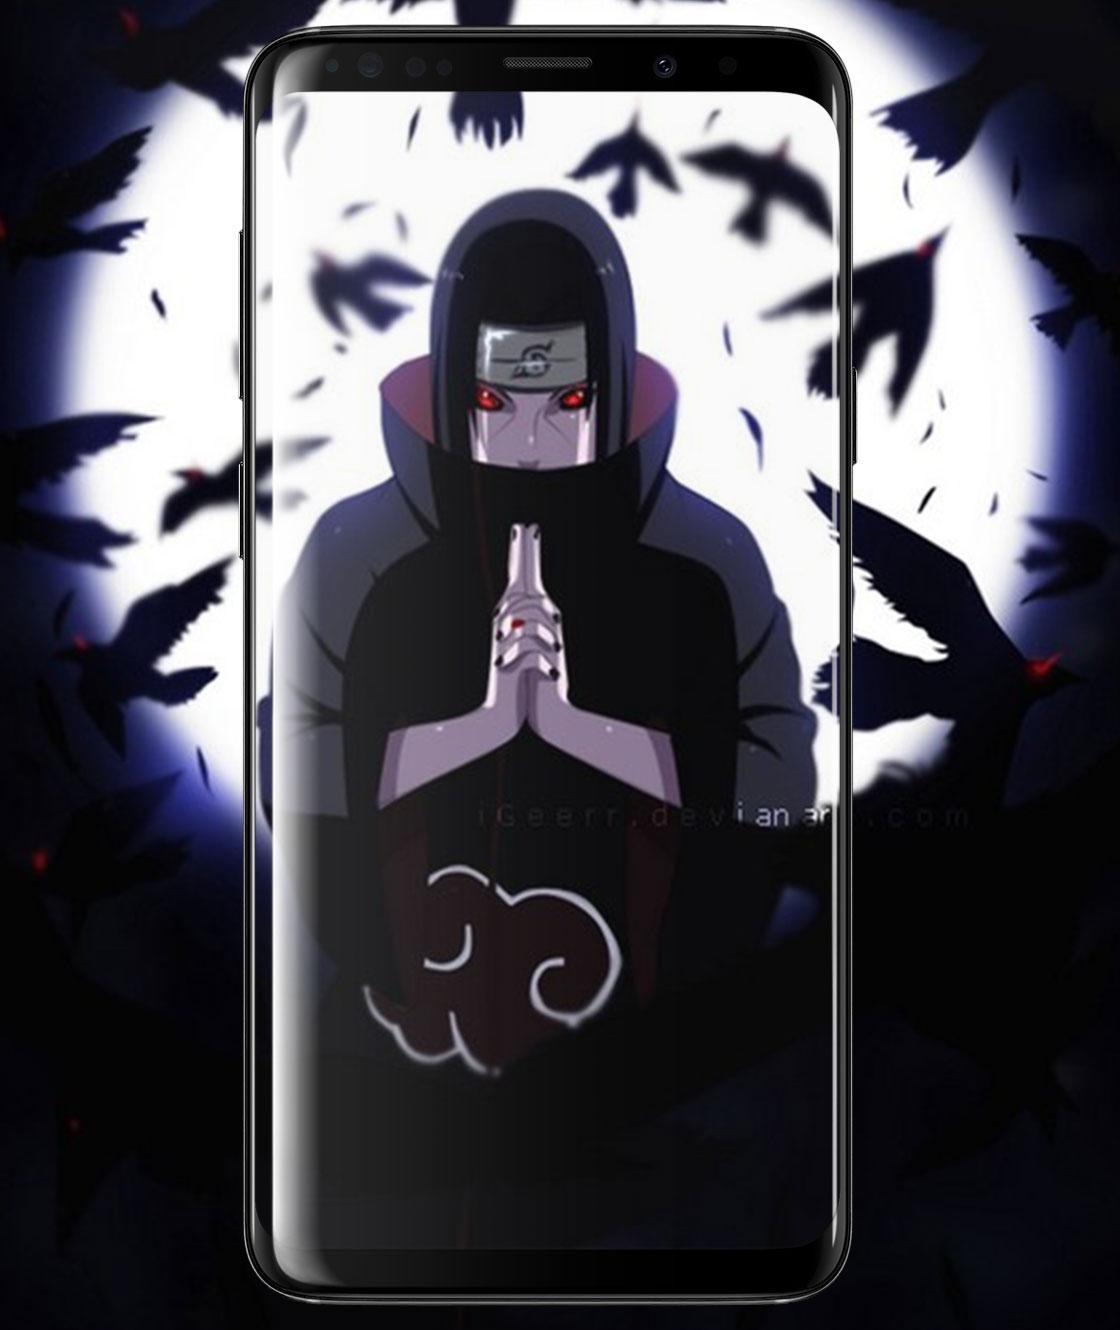 Uchiha Itachi Wallpapers Hd For Android Apk Download